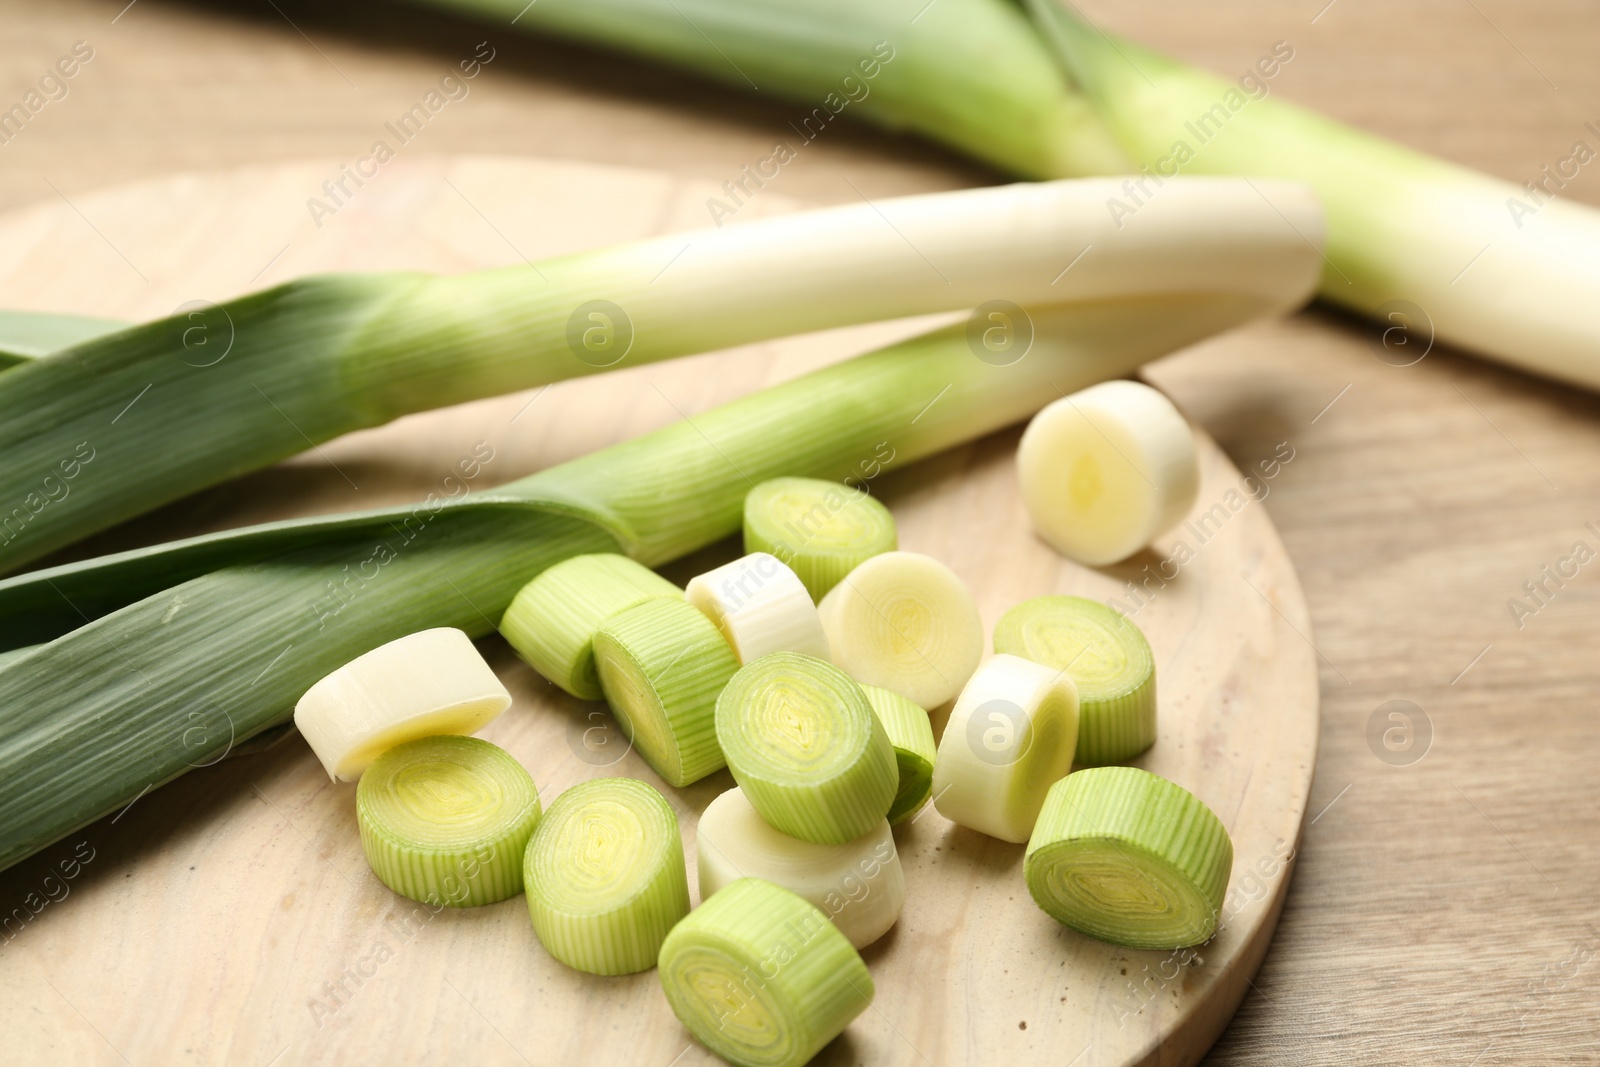 Photo of Whole and cut fresh leeks on wooden table, closeup